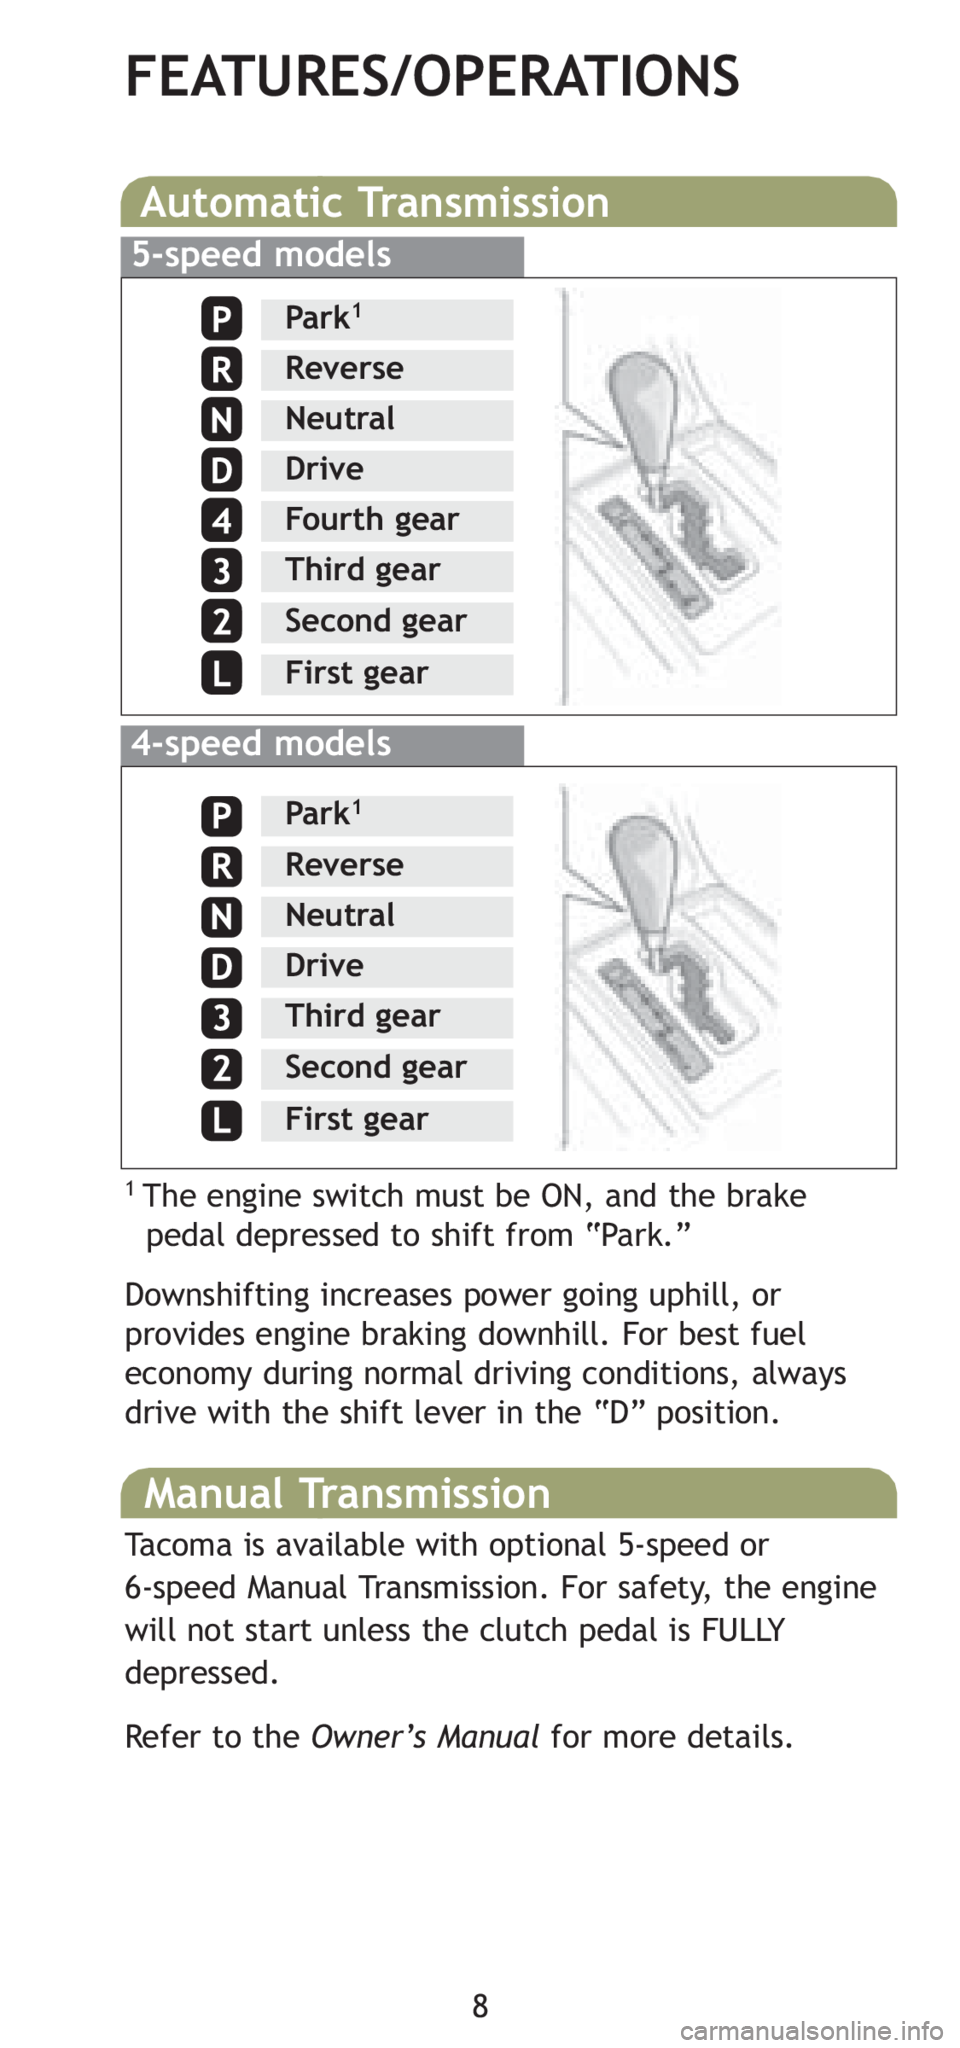 TOYOTA TACOMA 2008  Owners Manual (in English) 8
FEATURES/OPERATIONS
Automatic Transmission
1 The engine switch must be ON, and the brake
pedal depressed to shift from “Park.”
Downshifting increases power going uphill, or
provides engine braki